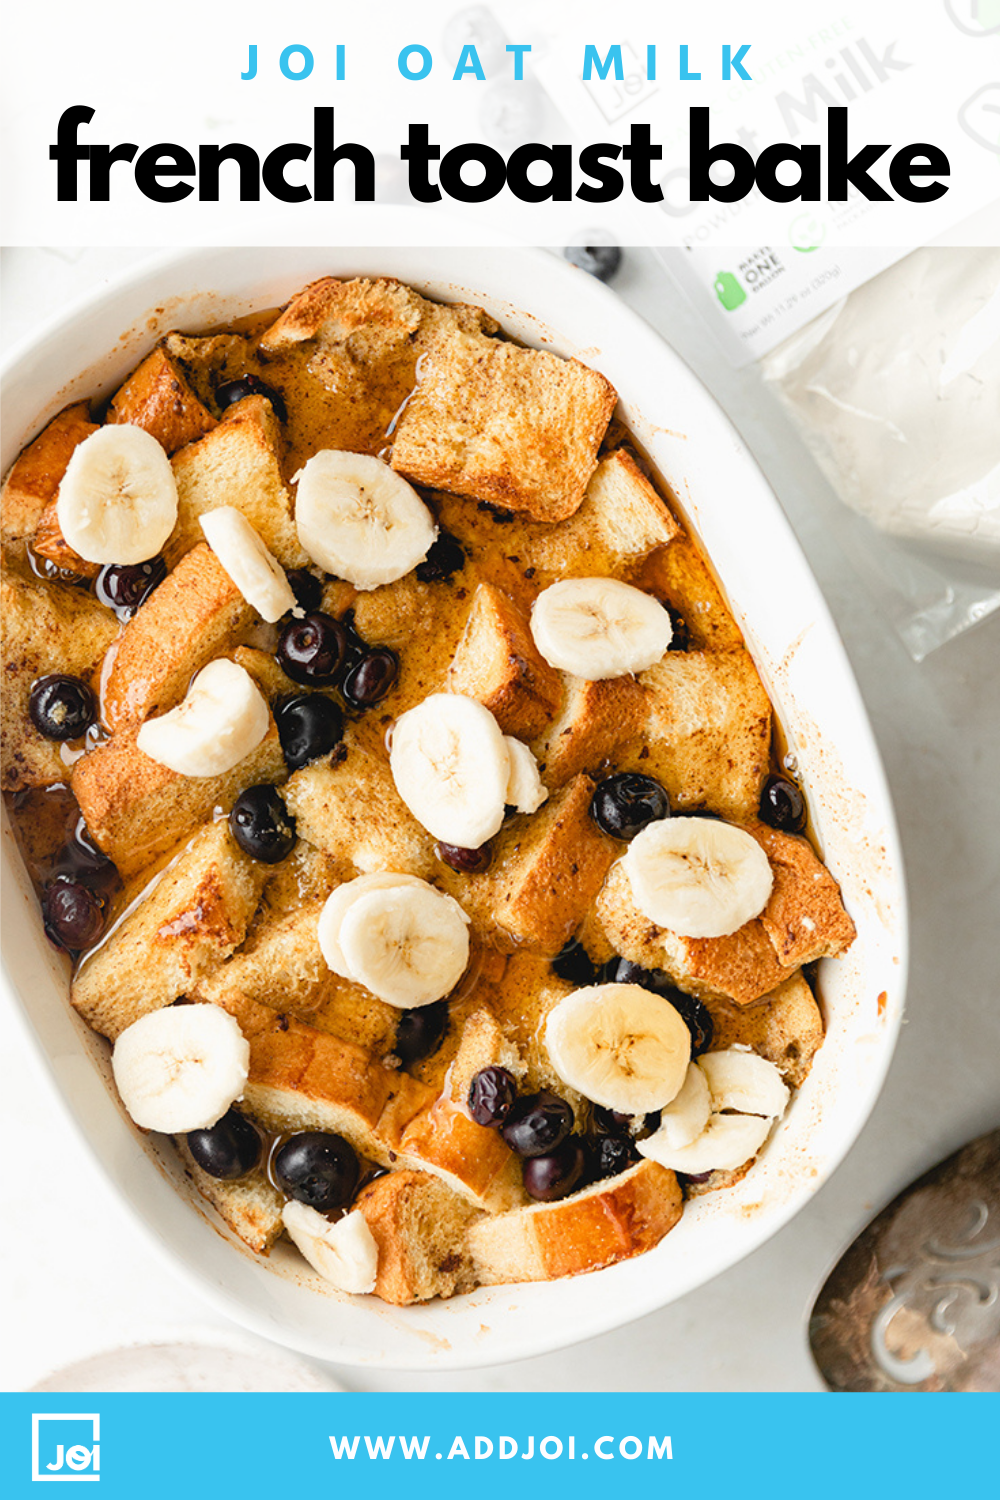 Oat Milk French Toast Bake | Made with JOI